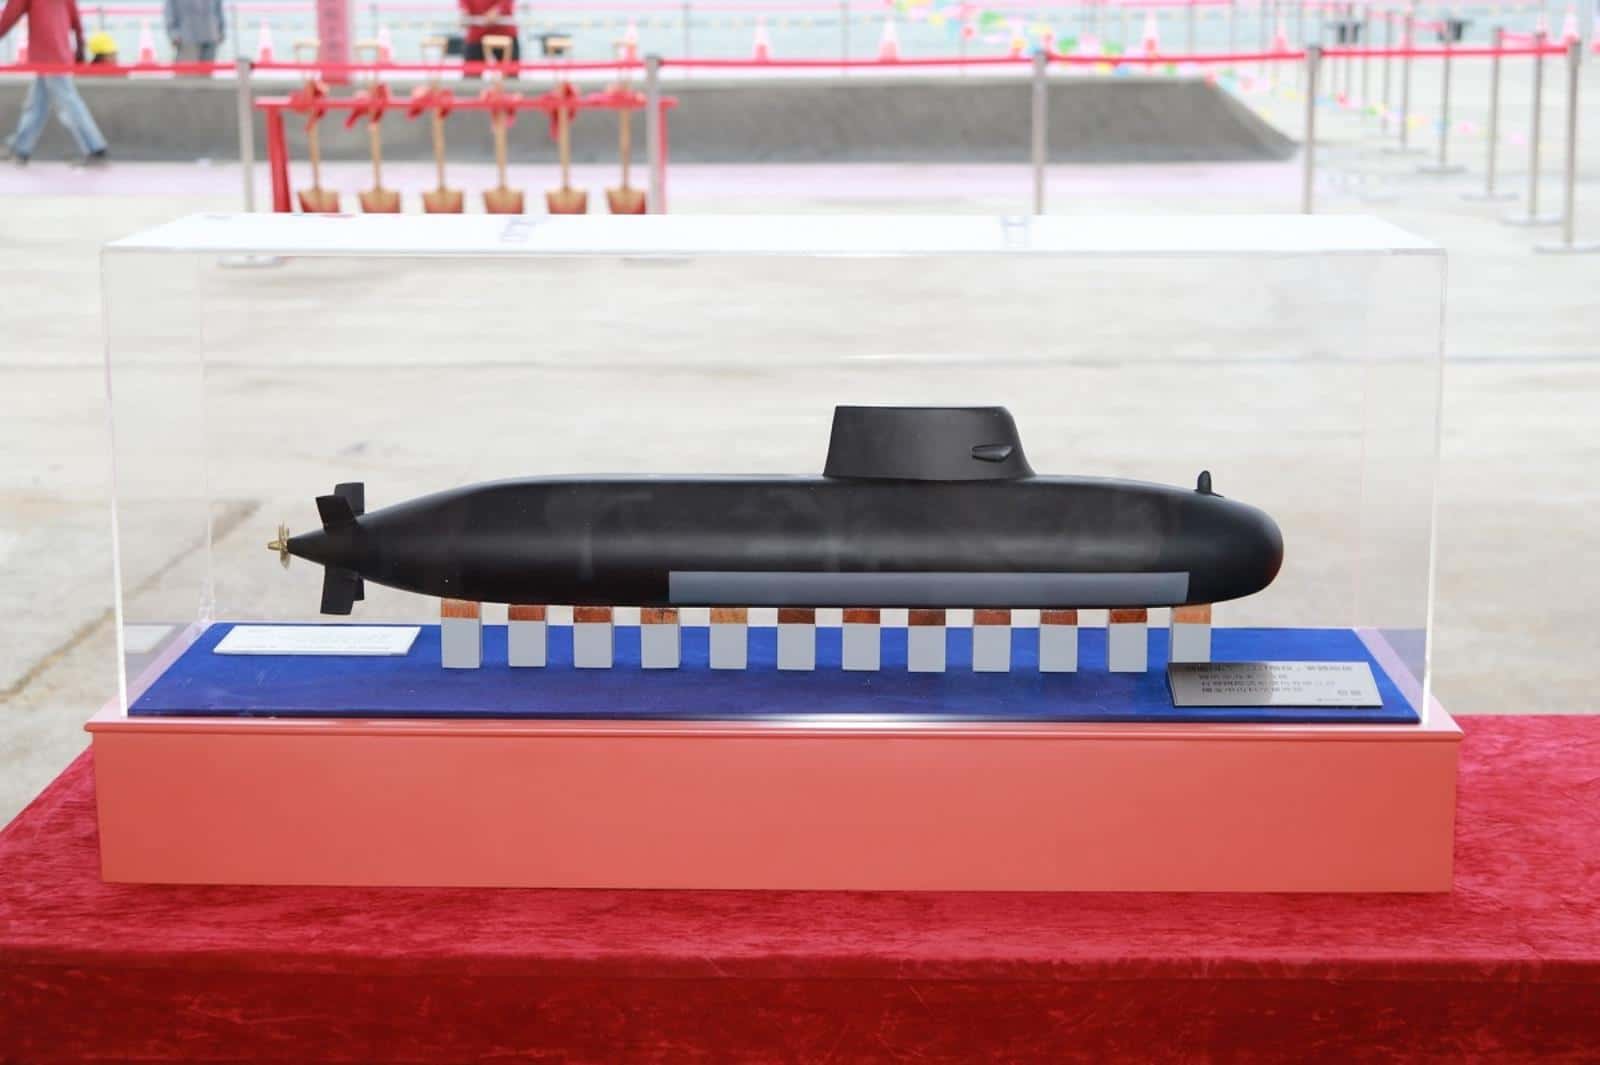 Taiwan has laid the keel for the new IDS submarine for the ROC Navy